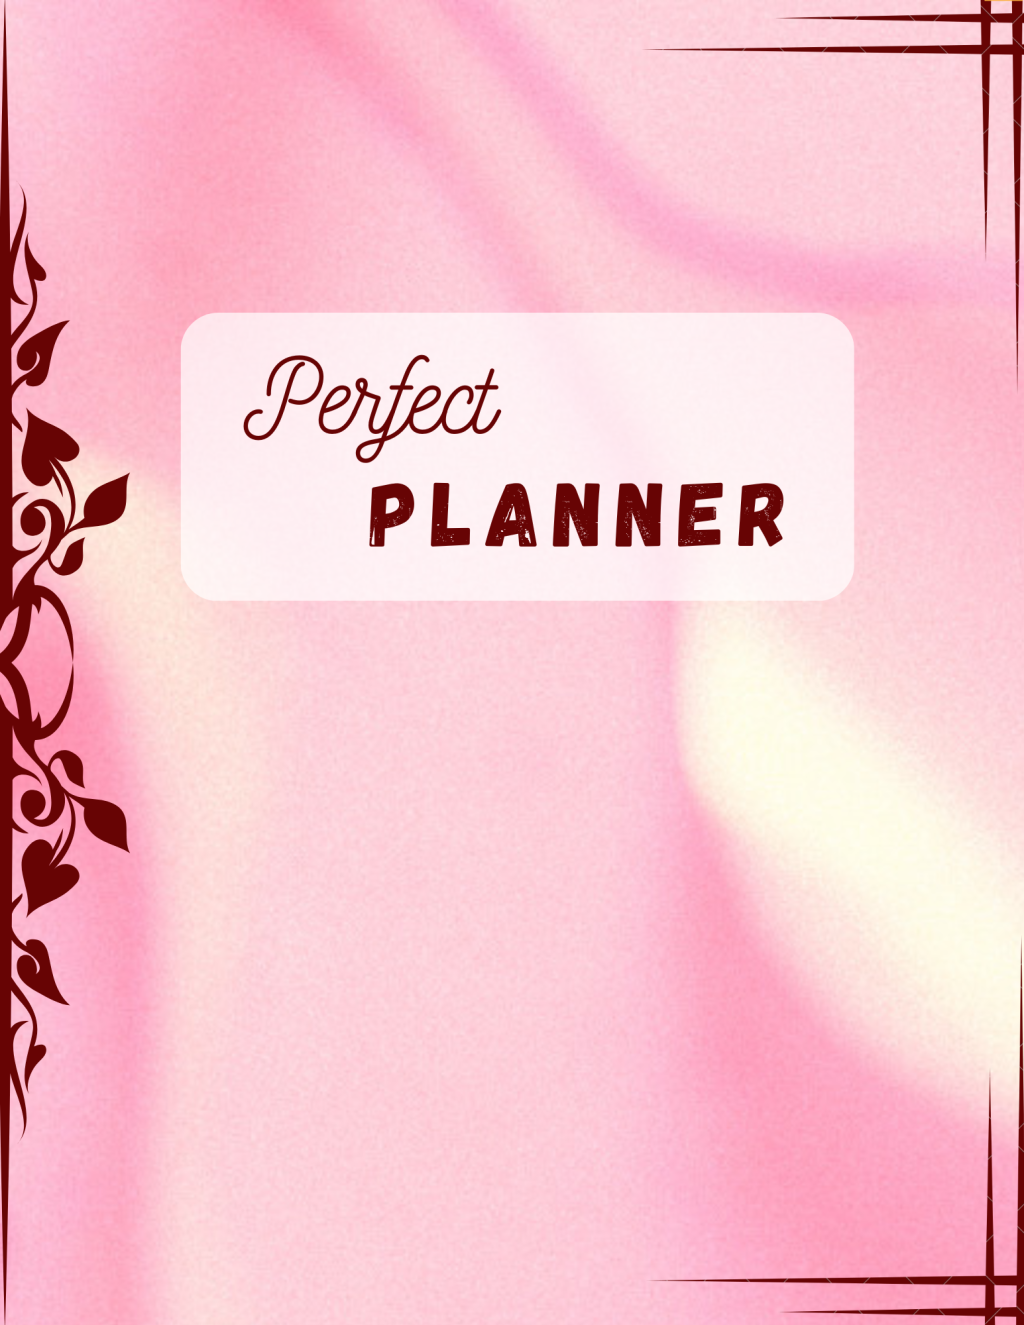 Key Features to Check while Choosing a Planner